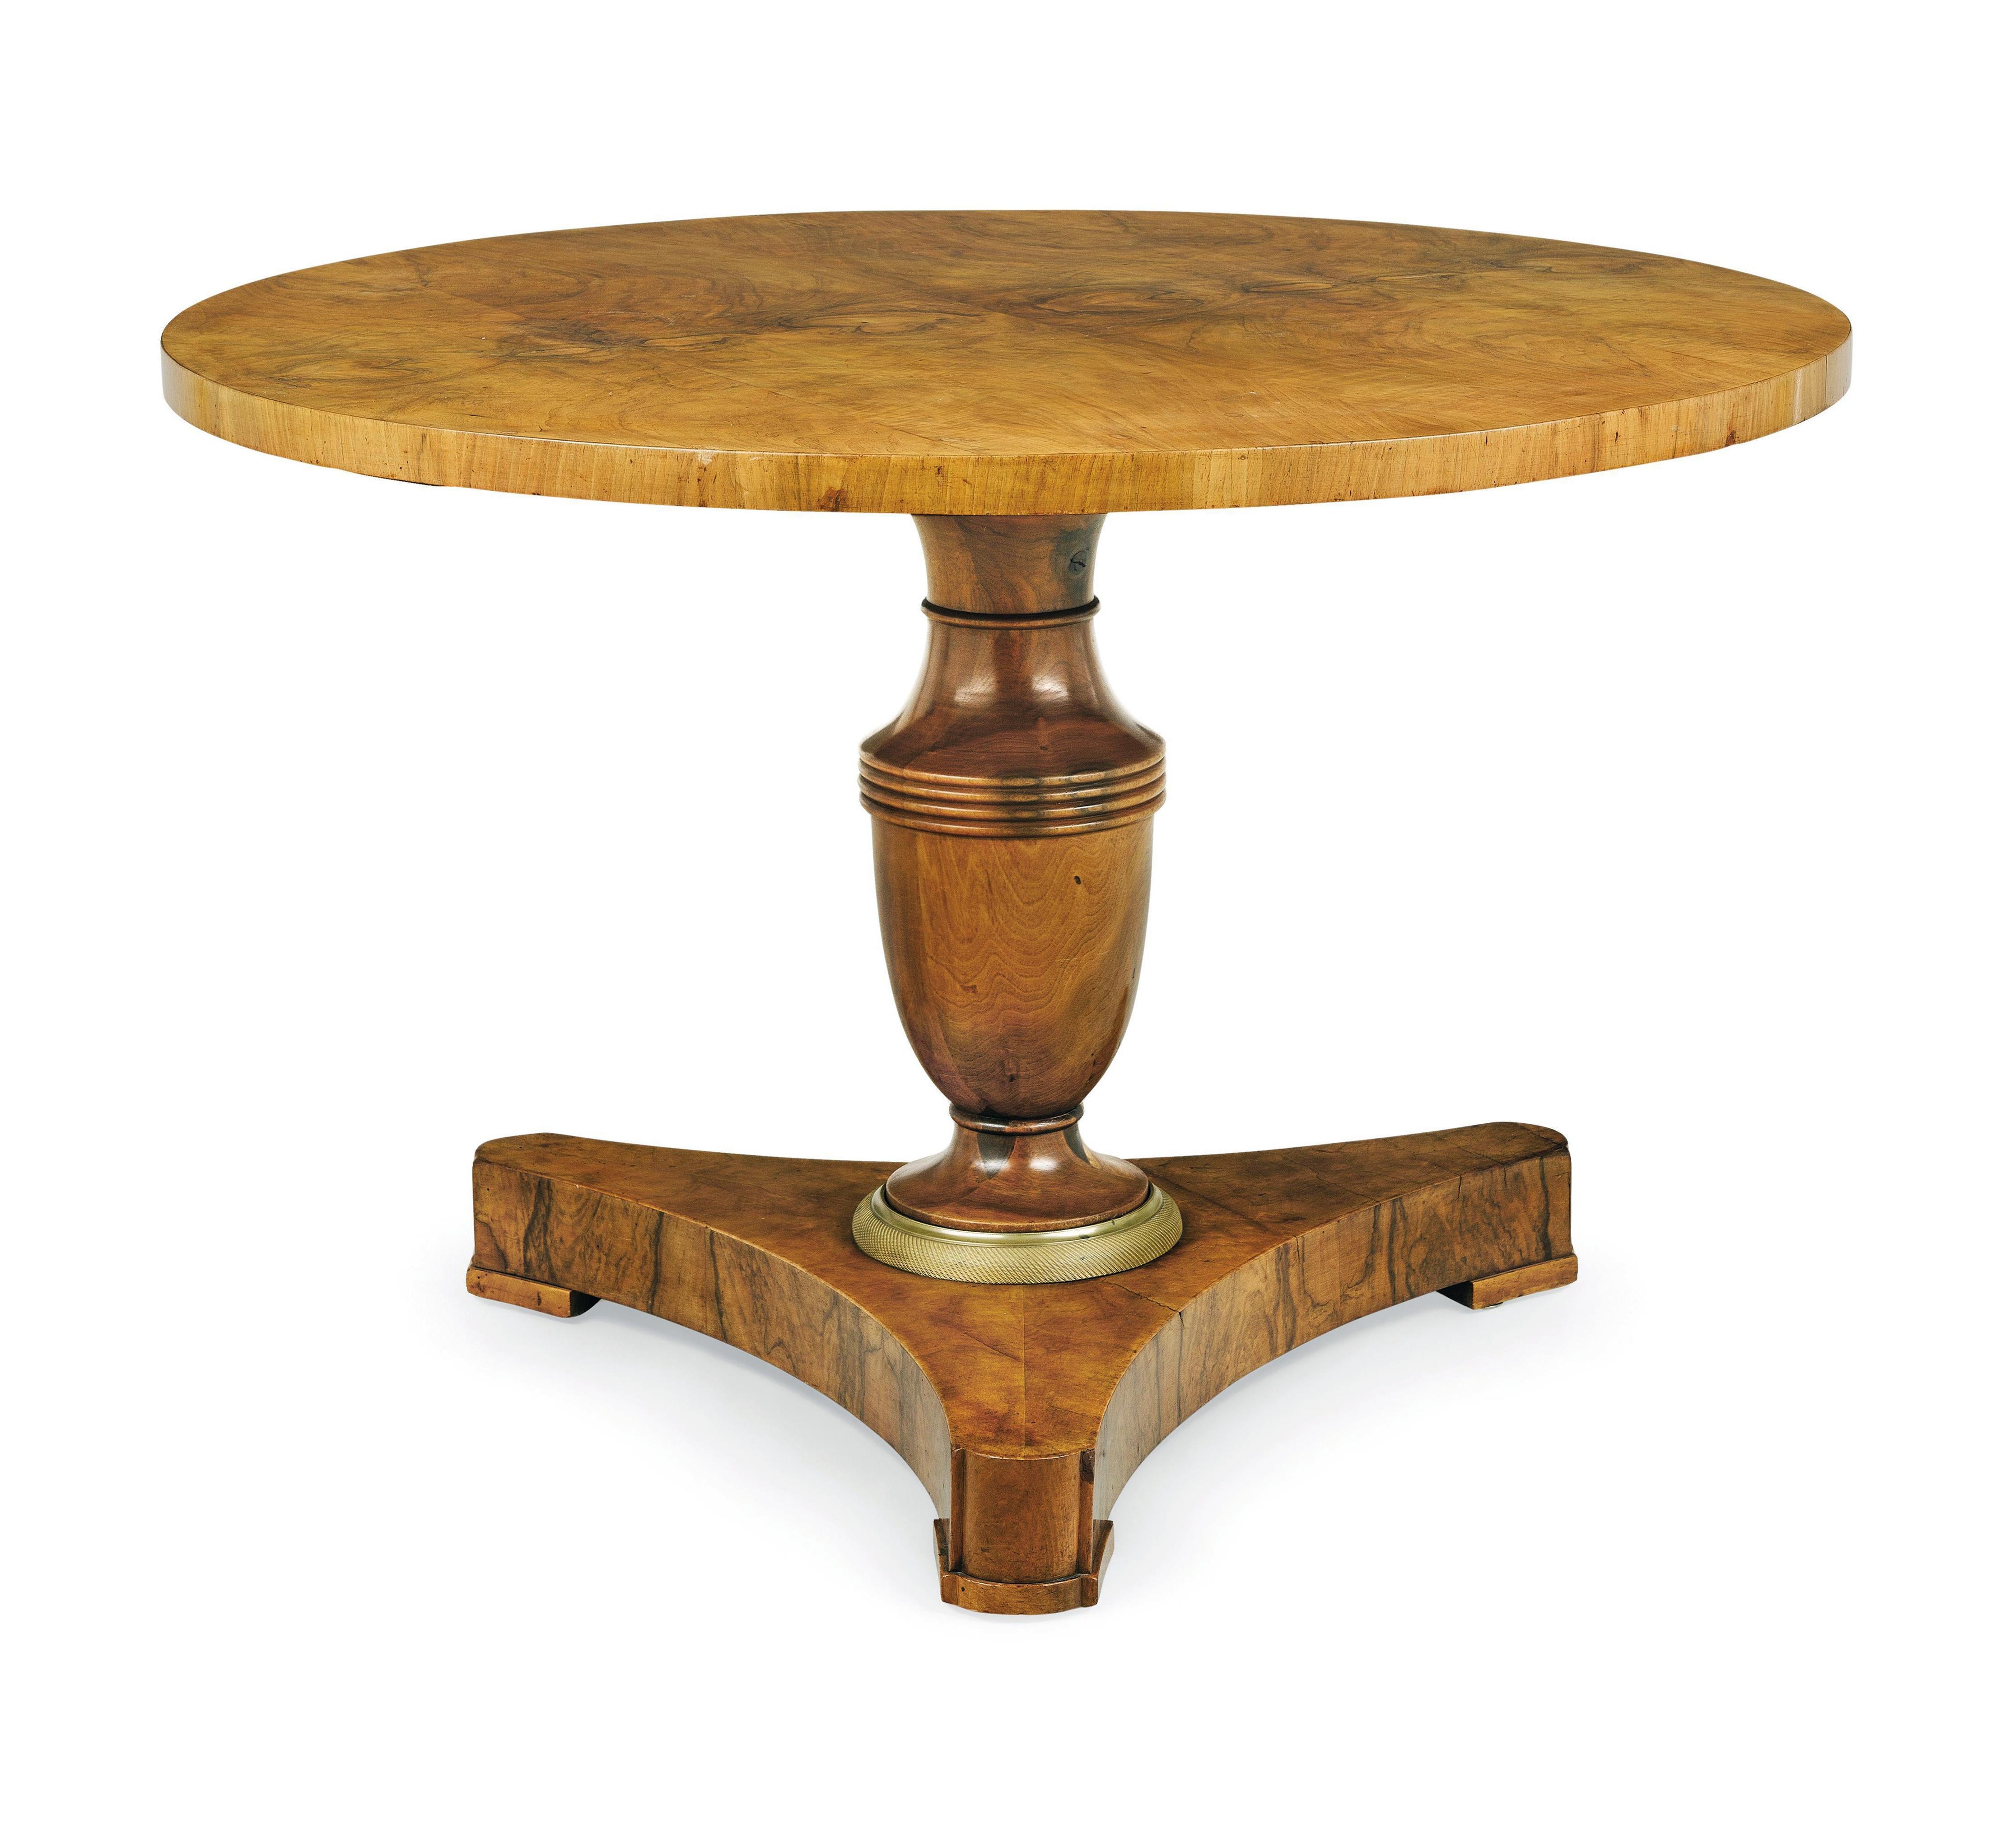 Hello,
This stunning Biedermeier walnut pedestal table is the best example of top-quality Viennese piece from circa 1825.

Viennese Biedermeier is distinguished by their sophisticated proportions, rare and refined design and excellent craftsmanship